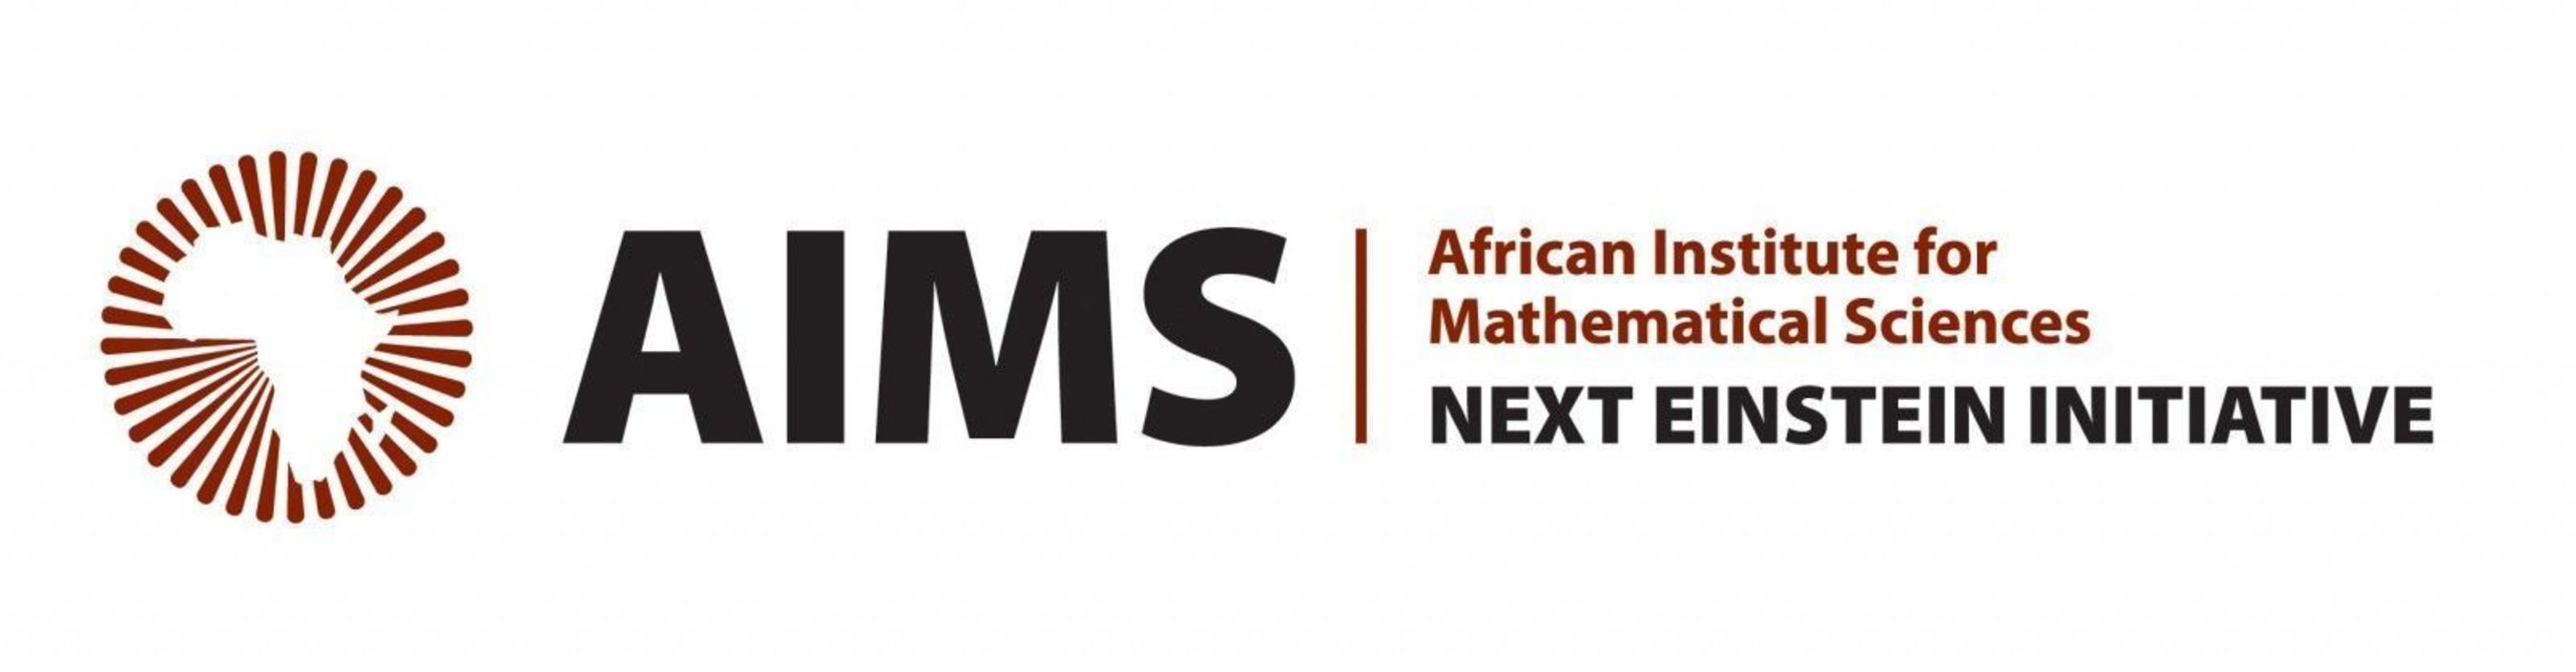 African Institute for Mathematical Science (AIMS) Logo (PRNewsFoto/AIMS)